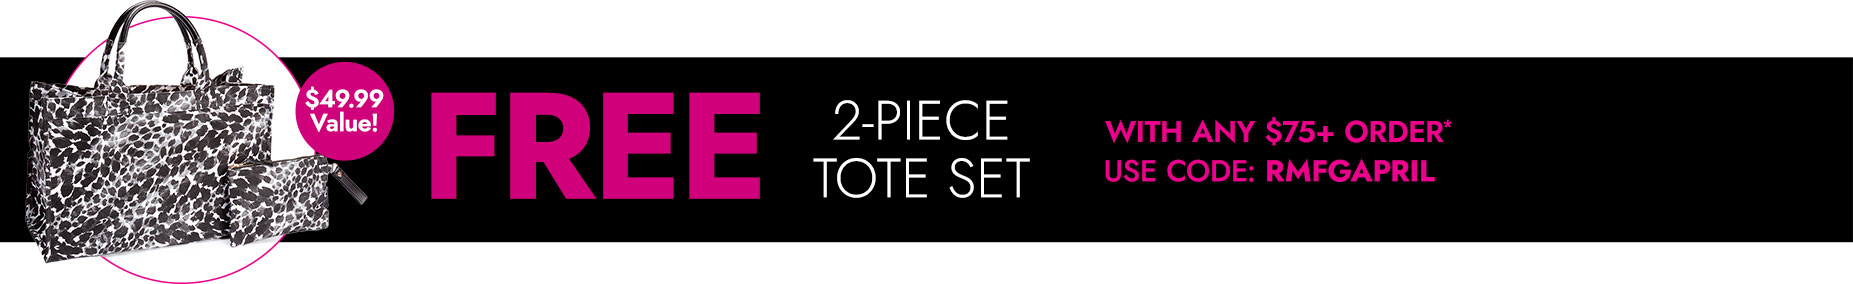 Free 2 -piece tote set with any $75+ order use code: RM24APR